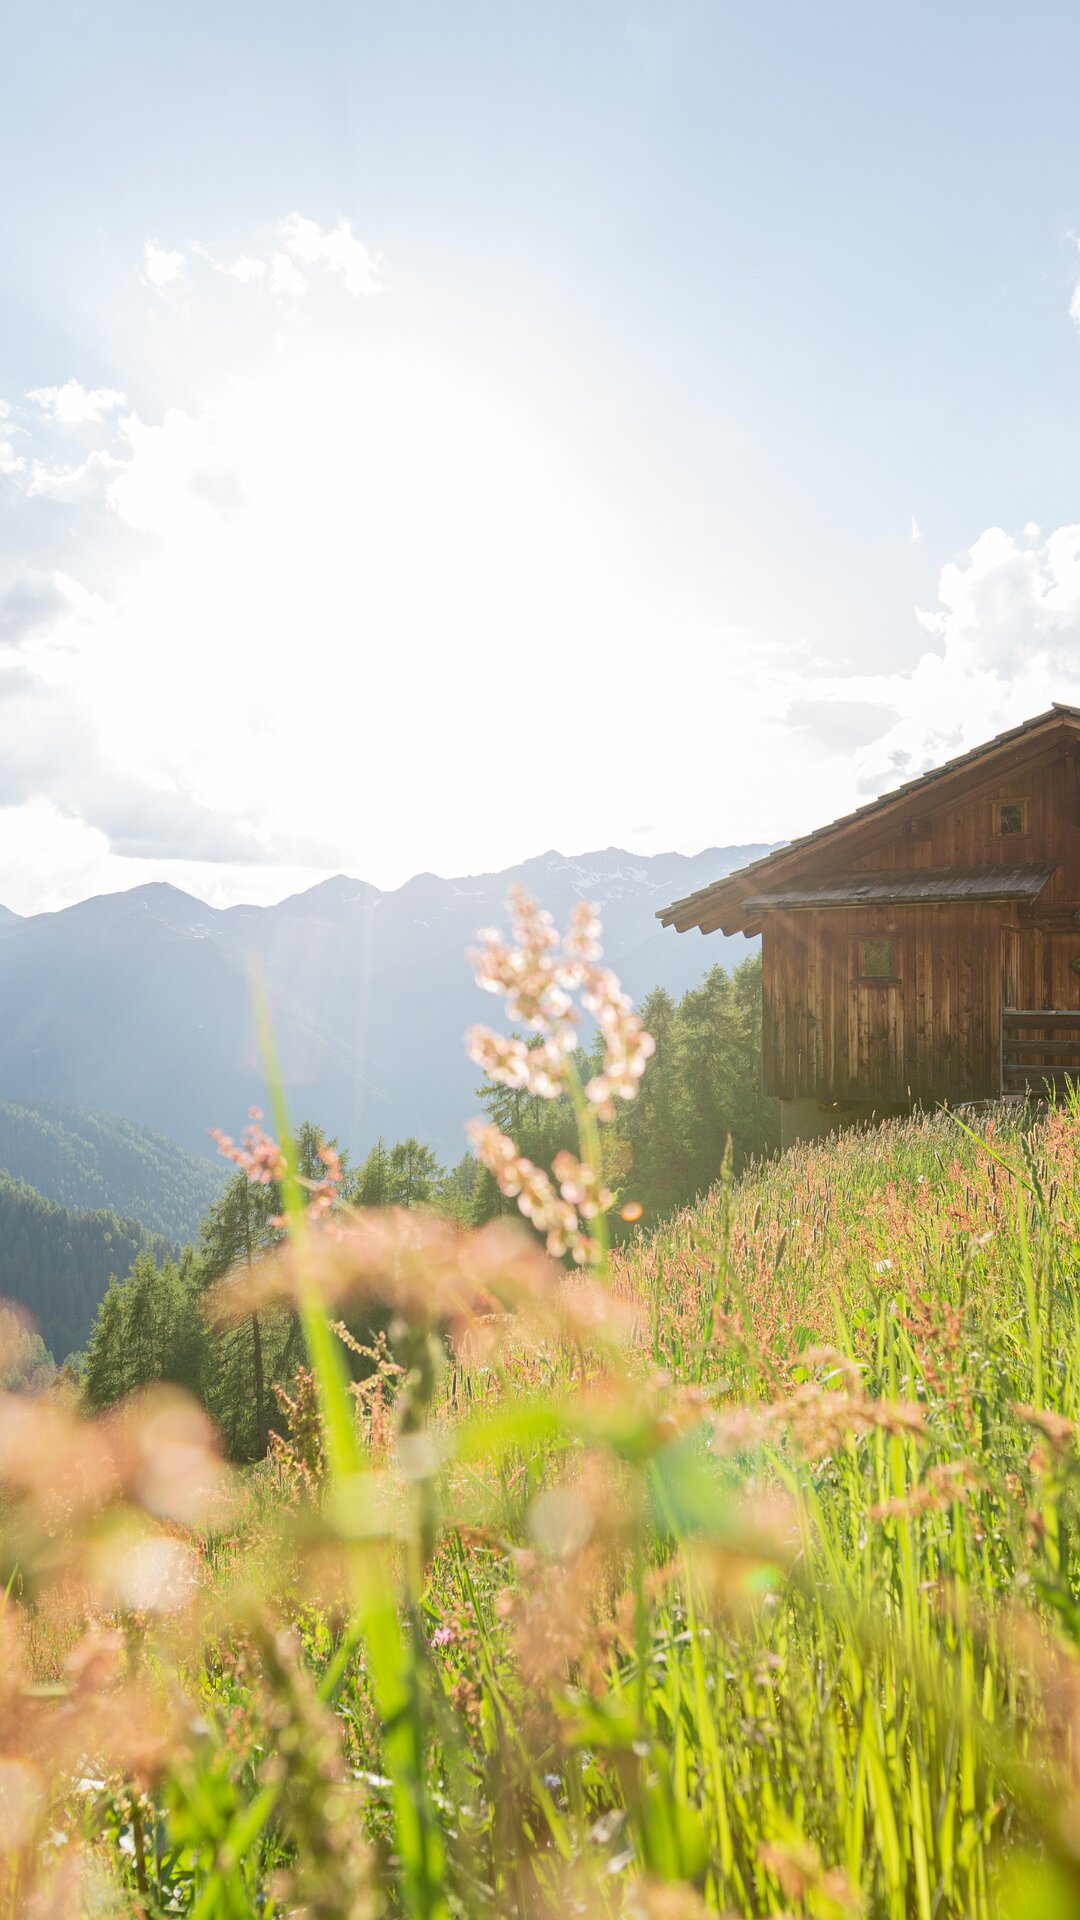 Wooden hay barn in the middle of a meadow summer | © TV Gsierer Tal_Kamilla Photography